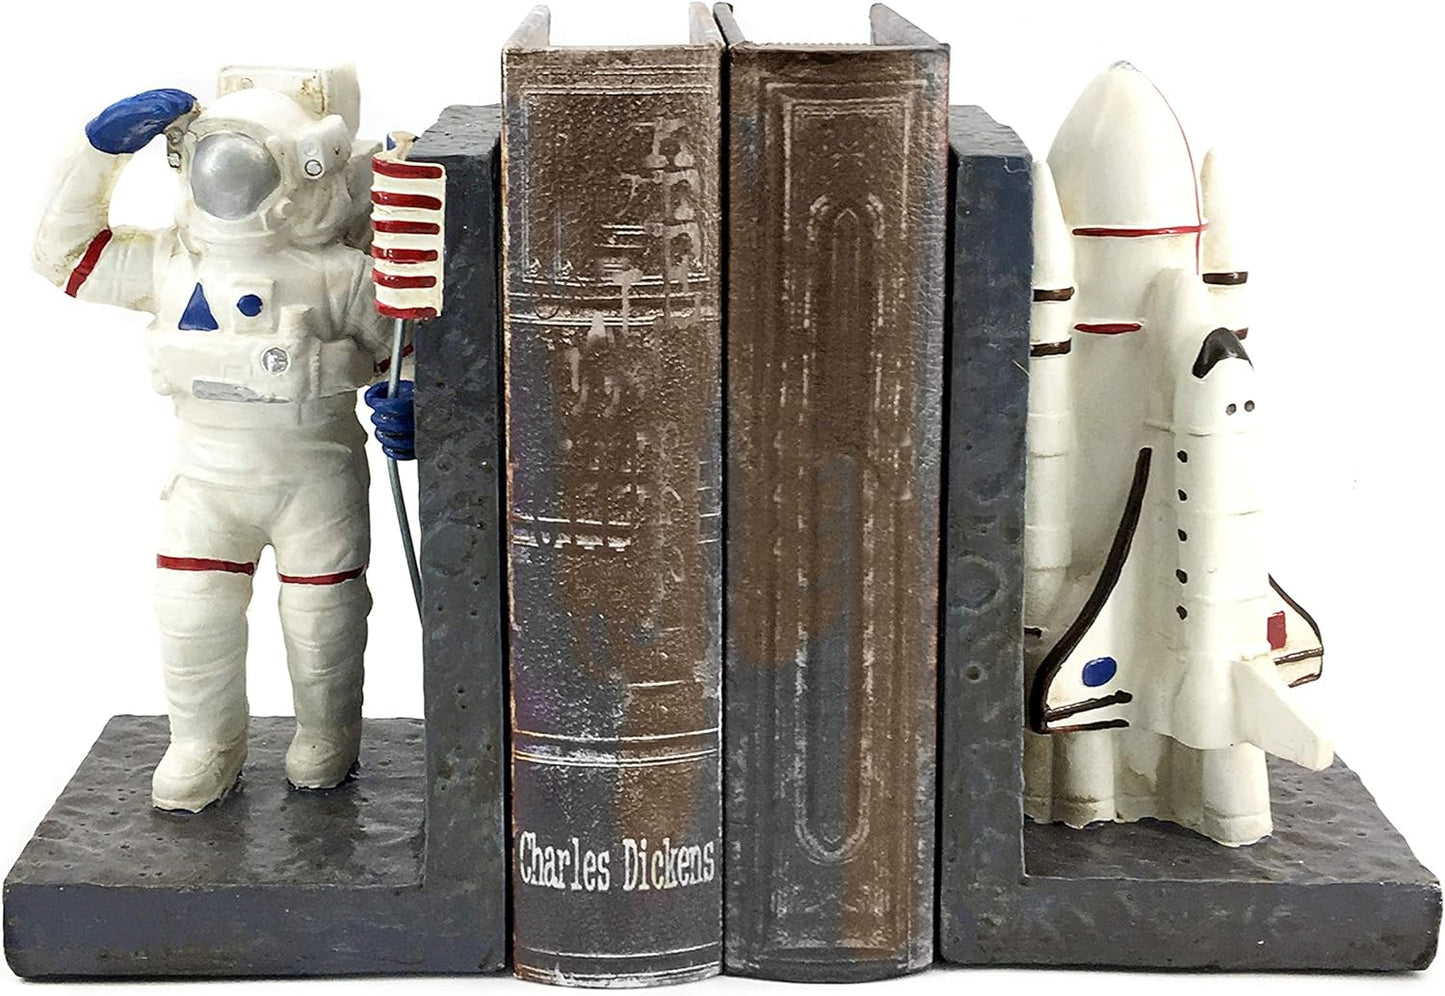 24650 Decorative Bookends Astronaut Space Rocket Ship Book Ends Stoppers Holders Unique Modern Home Accents 7 Inch Tall